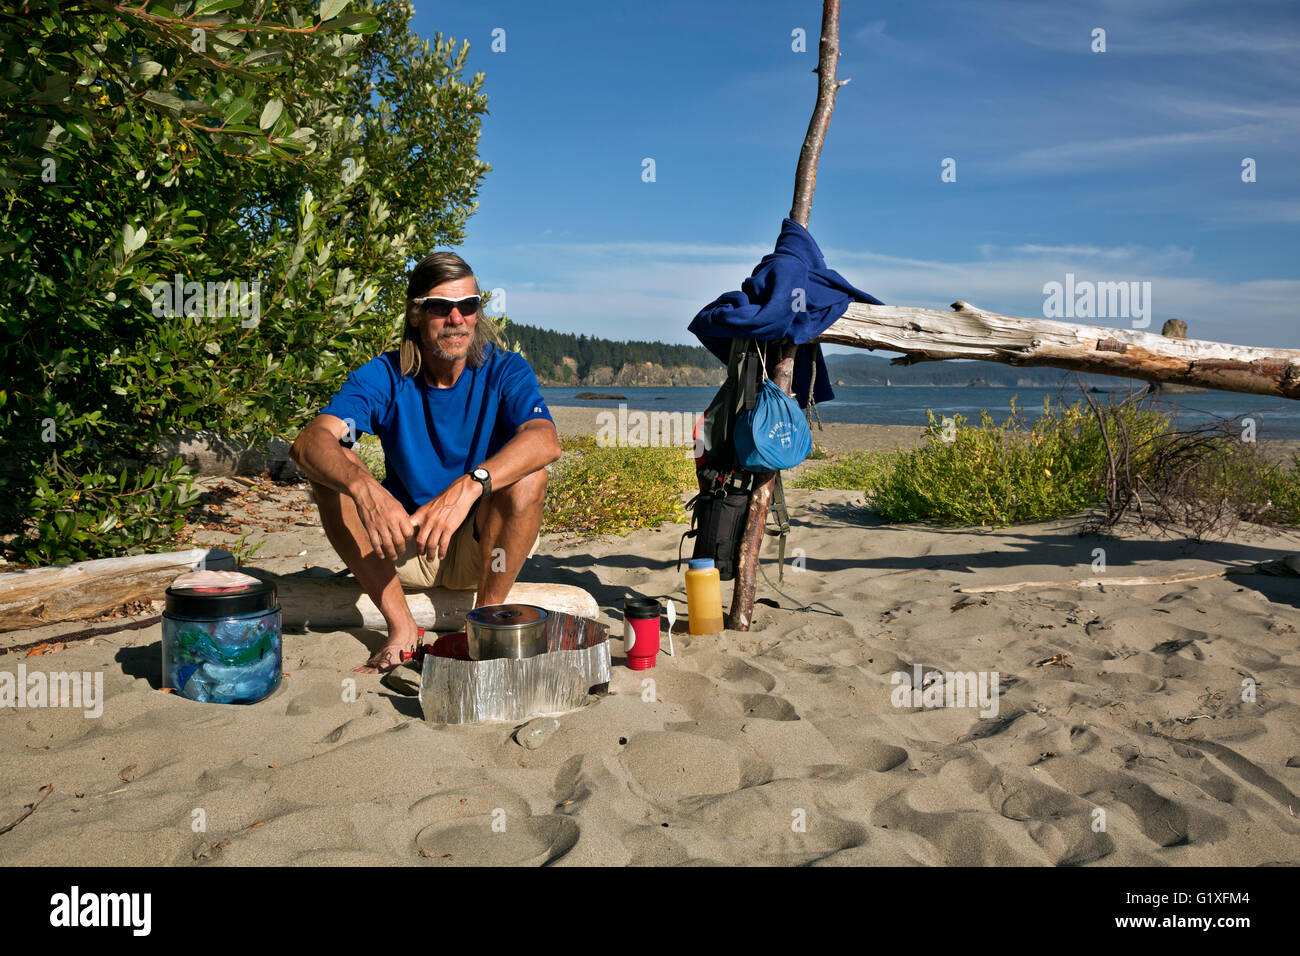 WASHINGTON - Cooking dinner at campsite on beach at Toleak Point on a wilderness section of the Pacific Coast in Olympic NP. Stock Photo